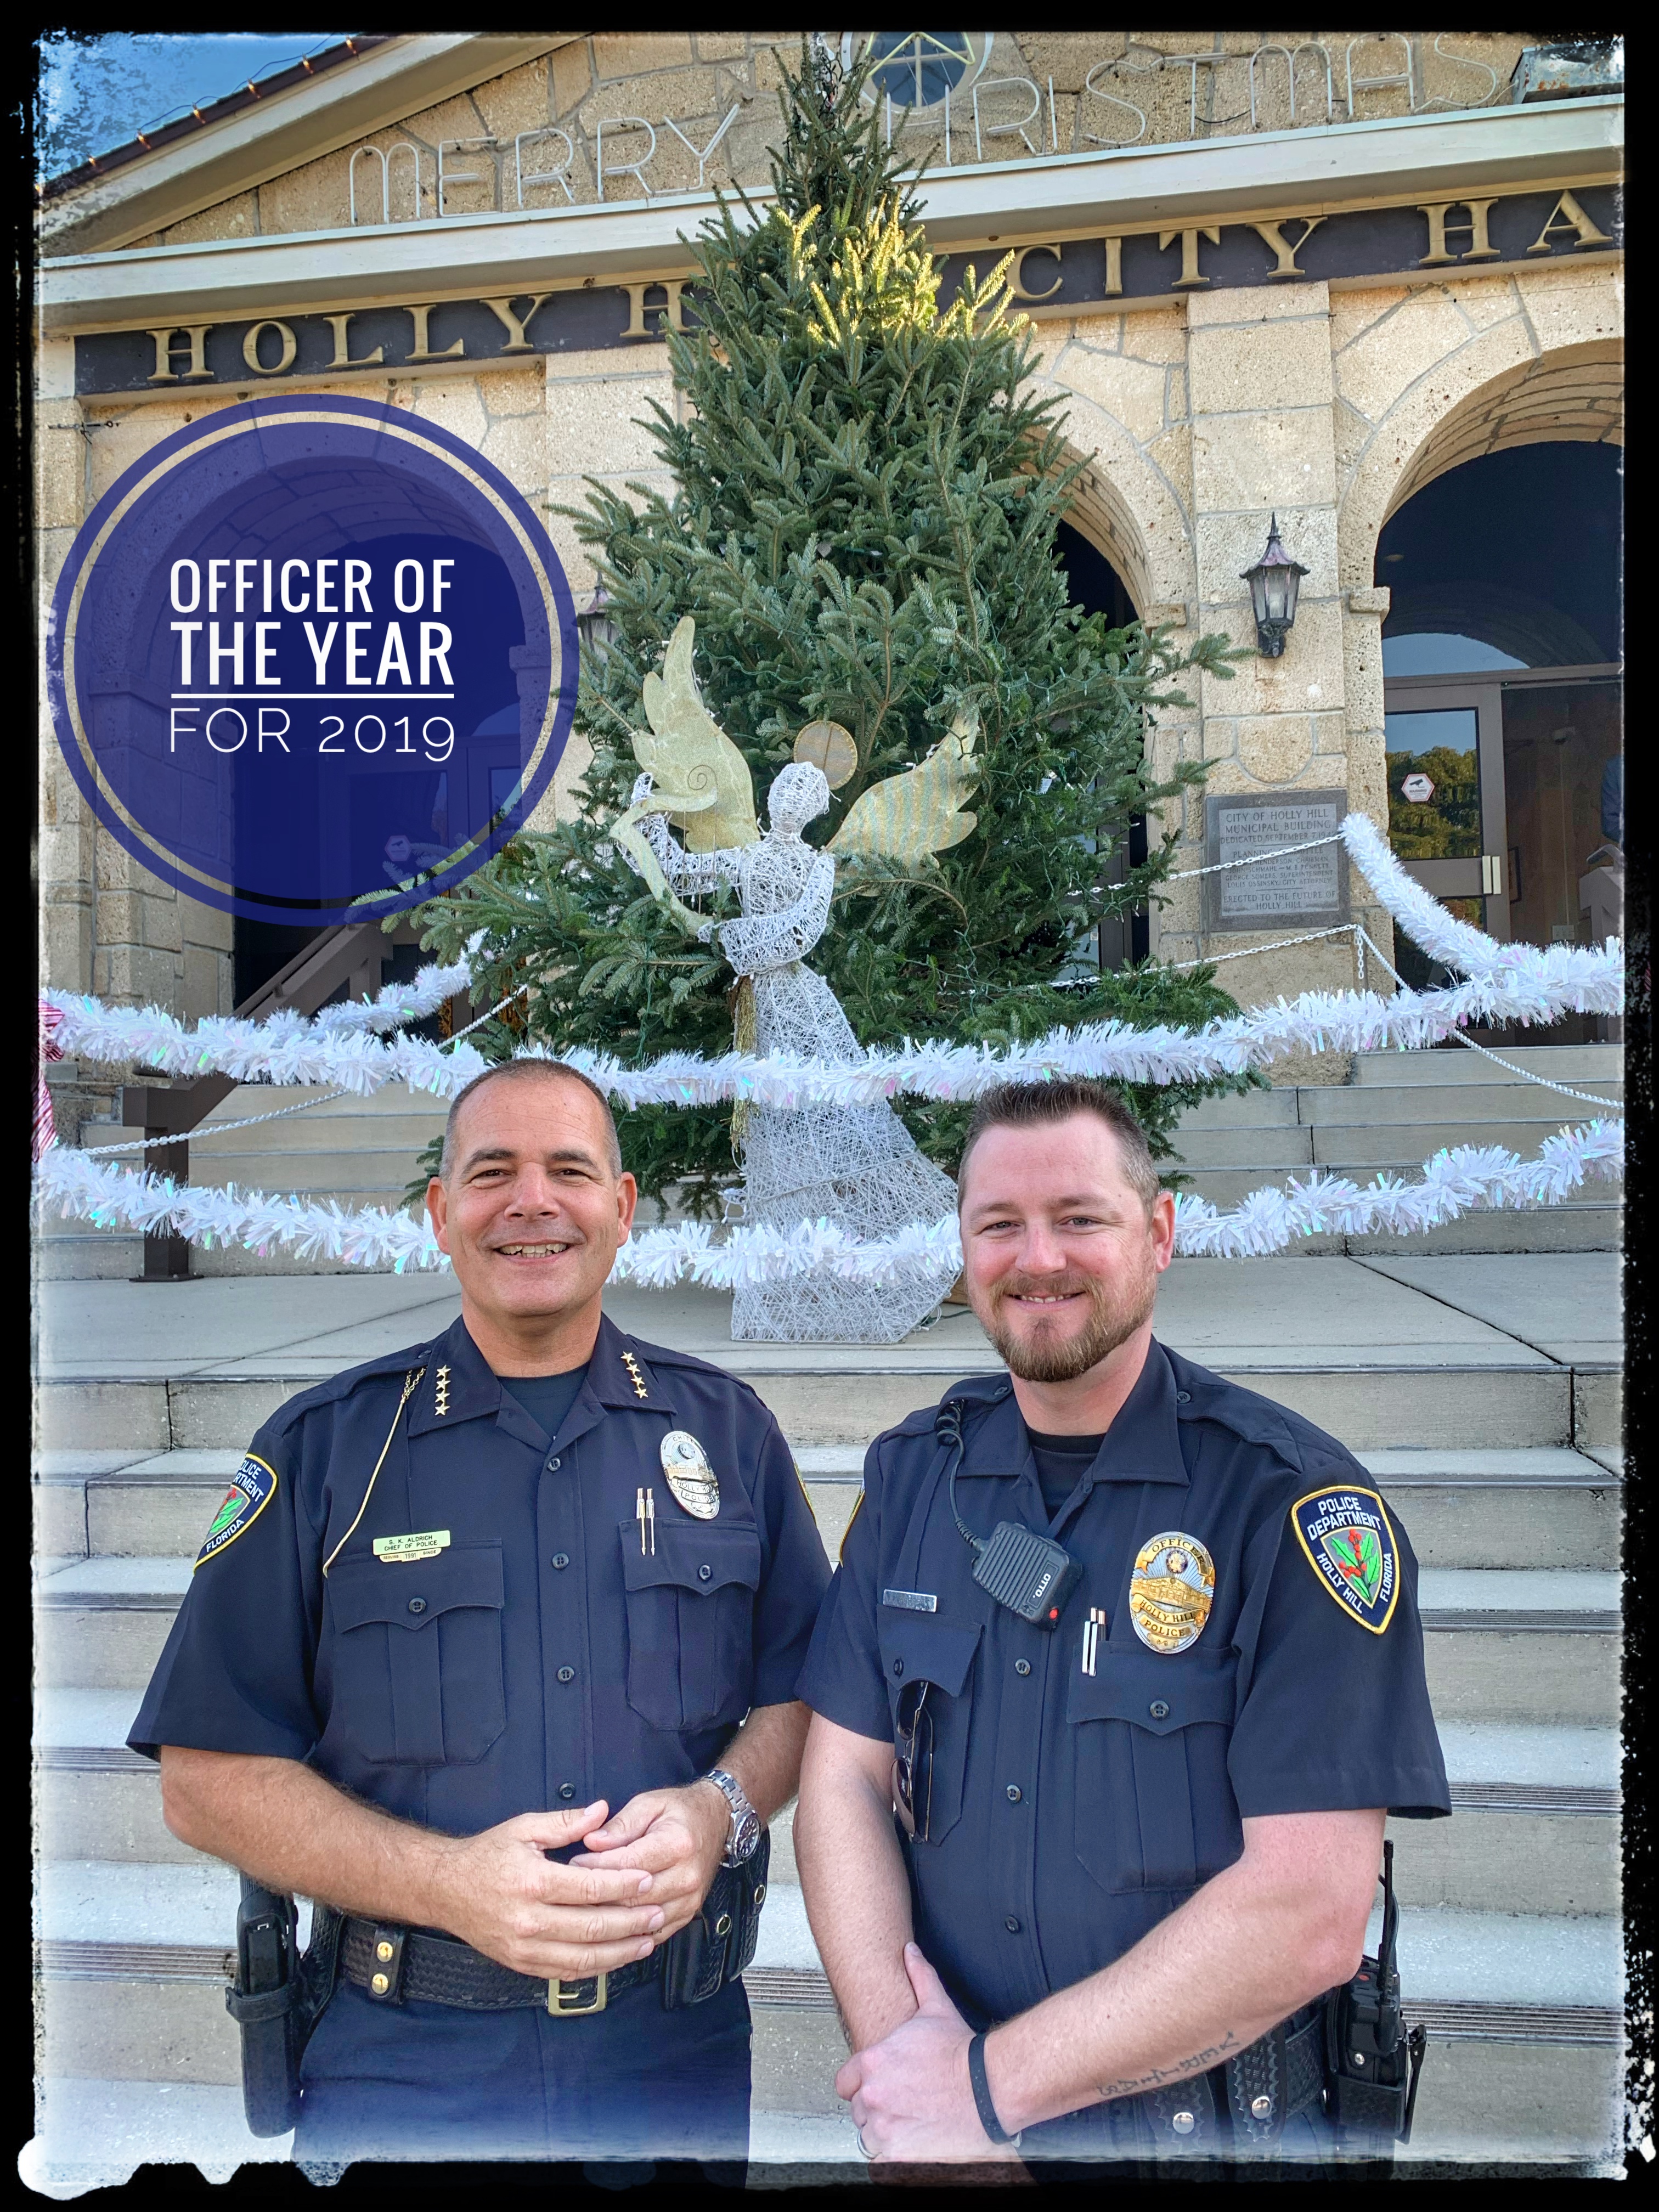 Church Hill Police Department earns Department of the Year award, Crime